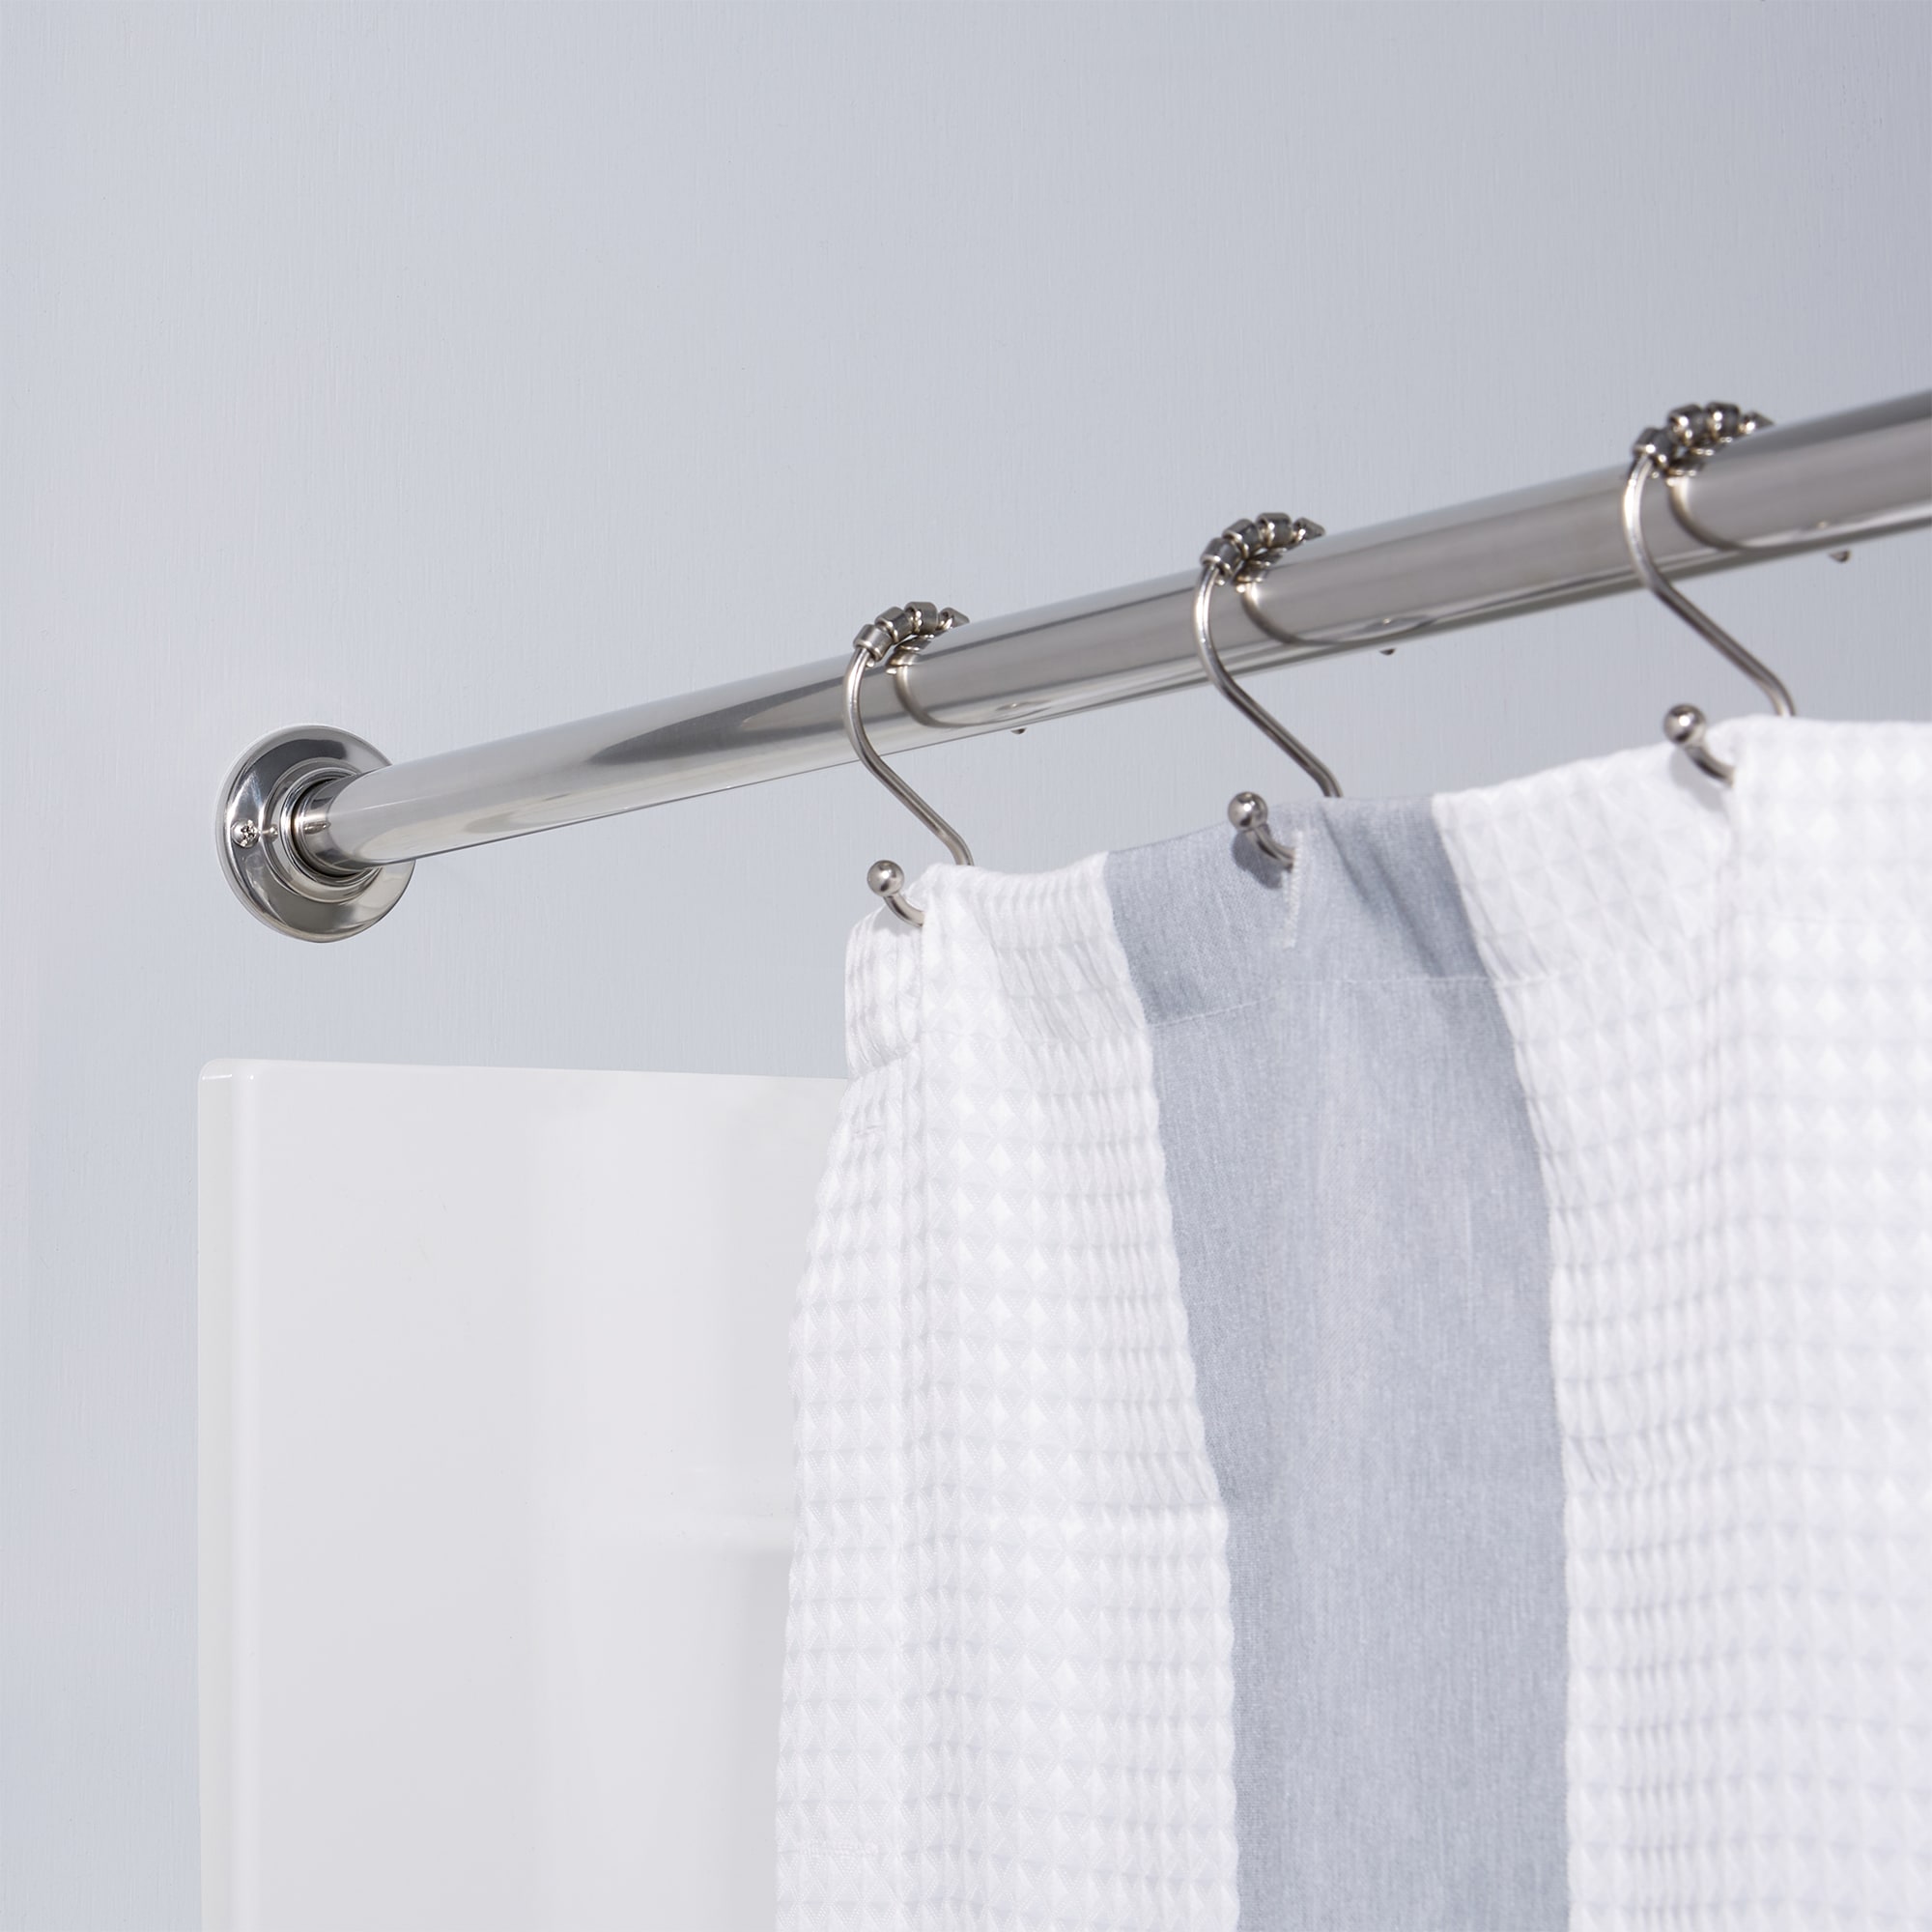 Fixed Shower Rods At Com, 80 Inch Shower Curtain Tension Rod